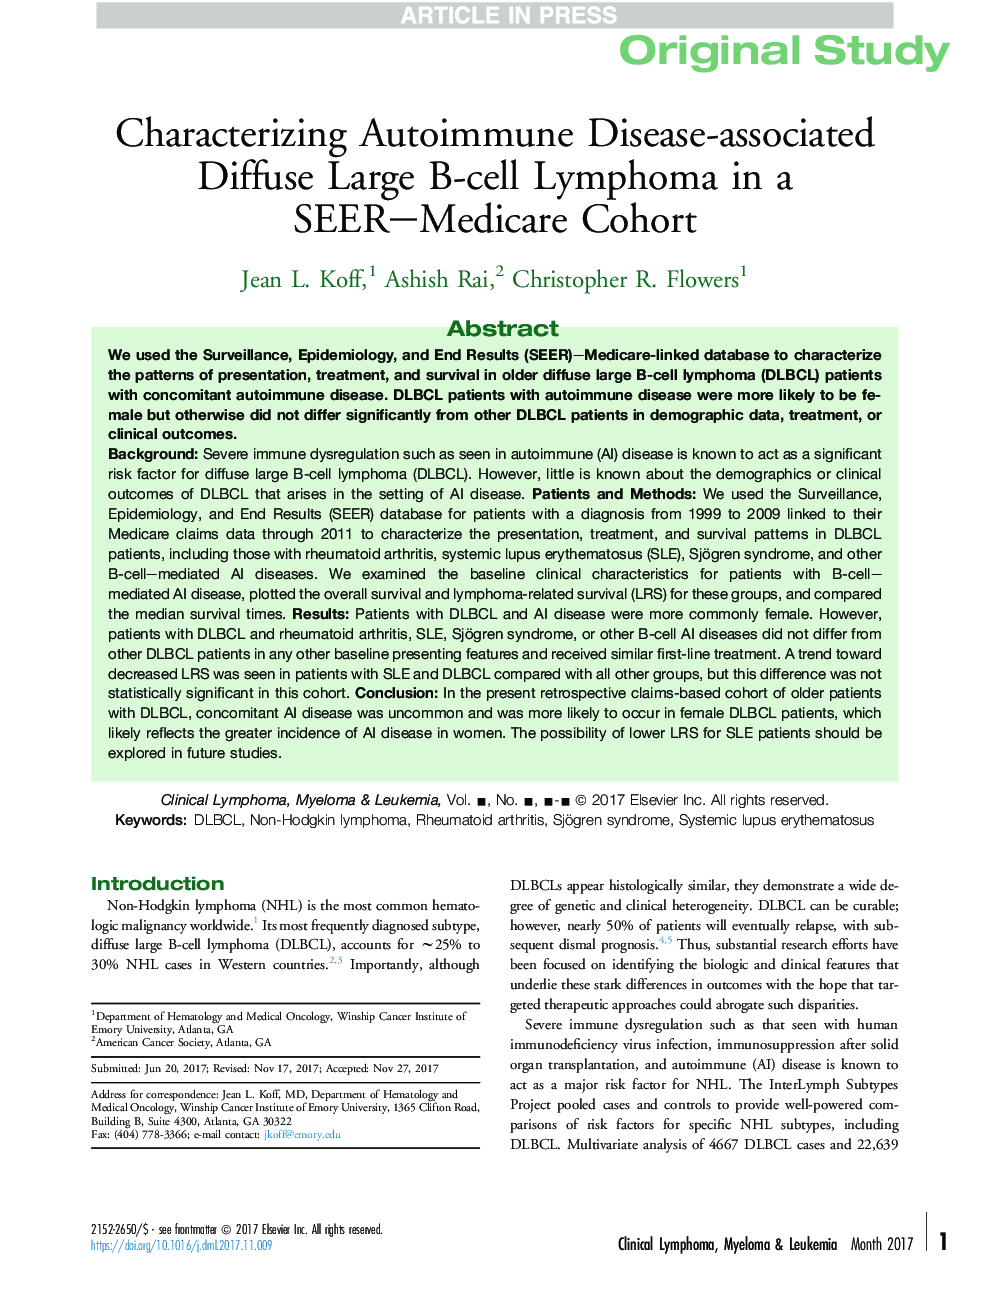 Characterizing Autoimmune Disease-associated Diffuse Large B-cell Lymphoma in a SEER-Medicare Cohort